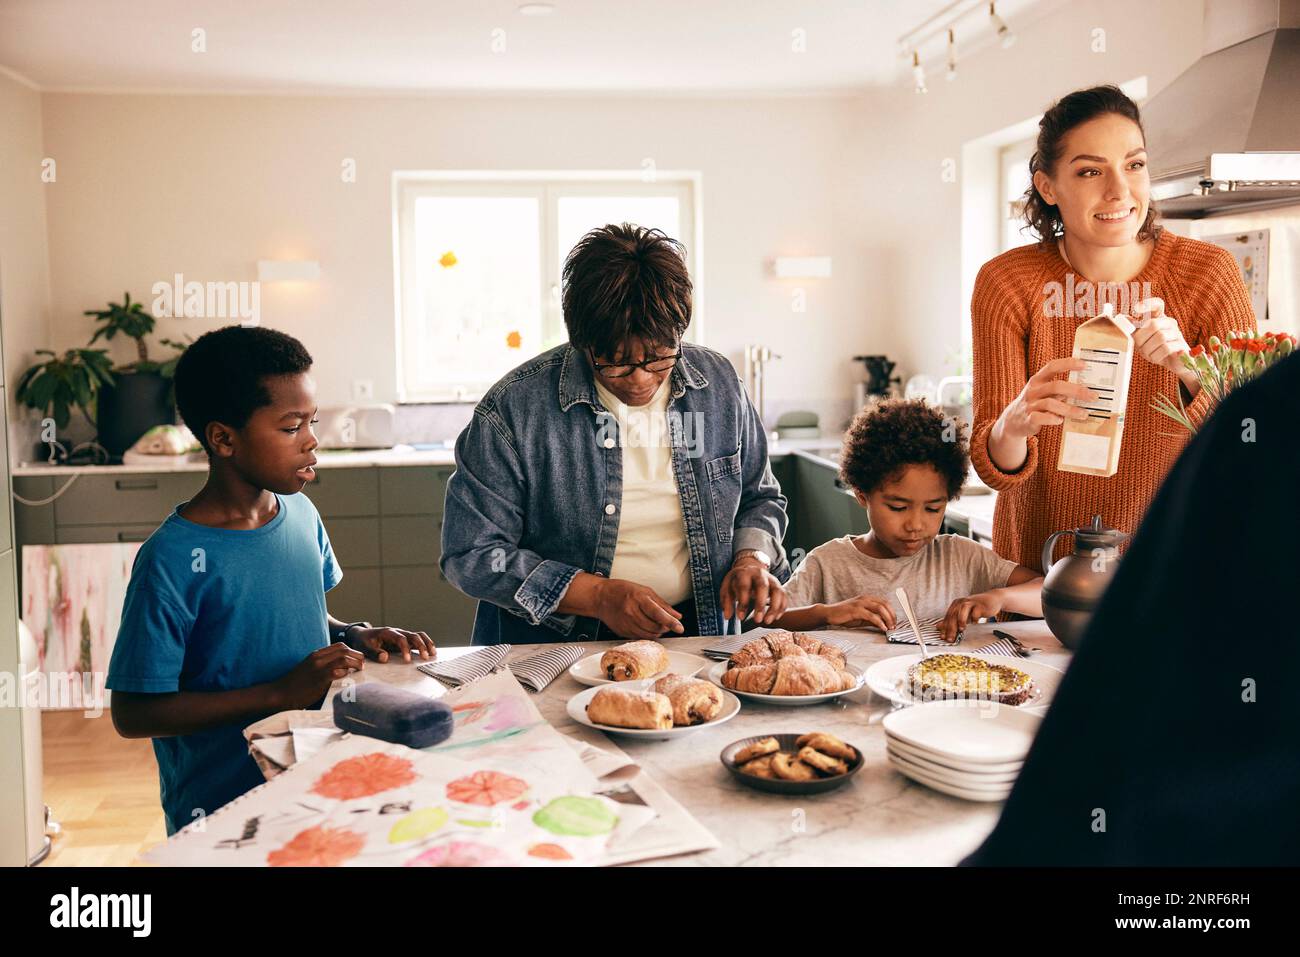 Family helping each other while preparing breakfast on kitchen island at home Stock Photo